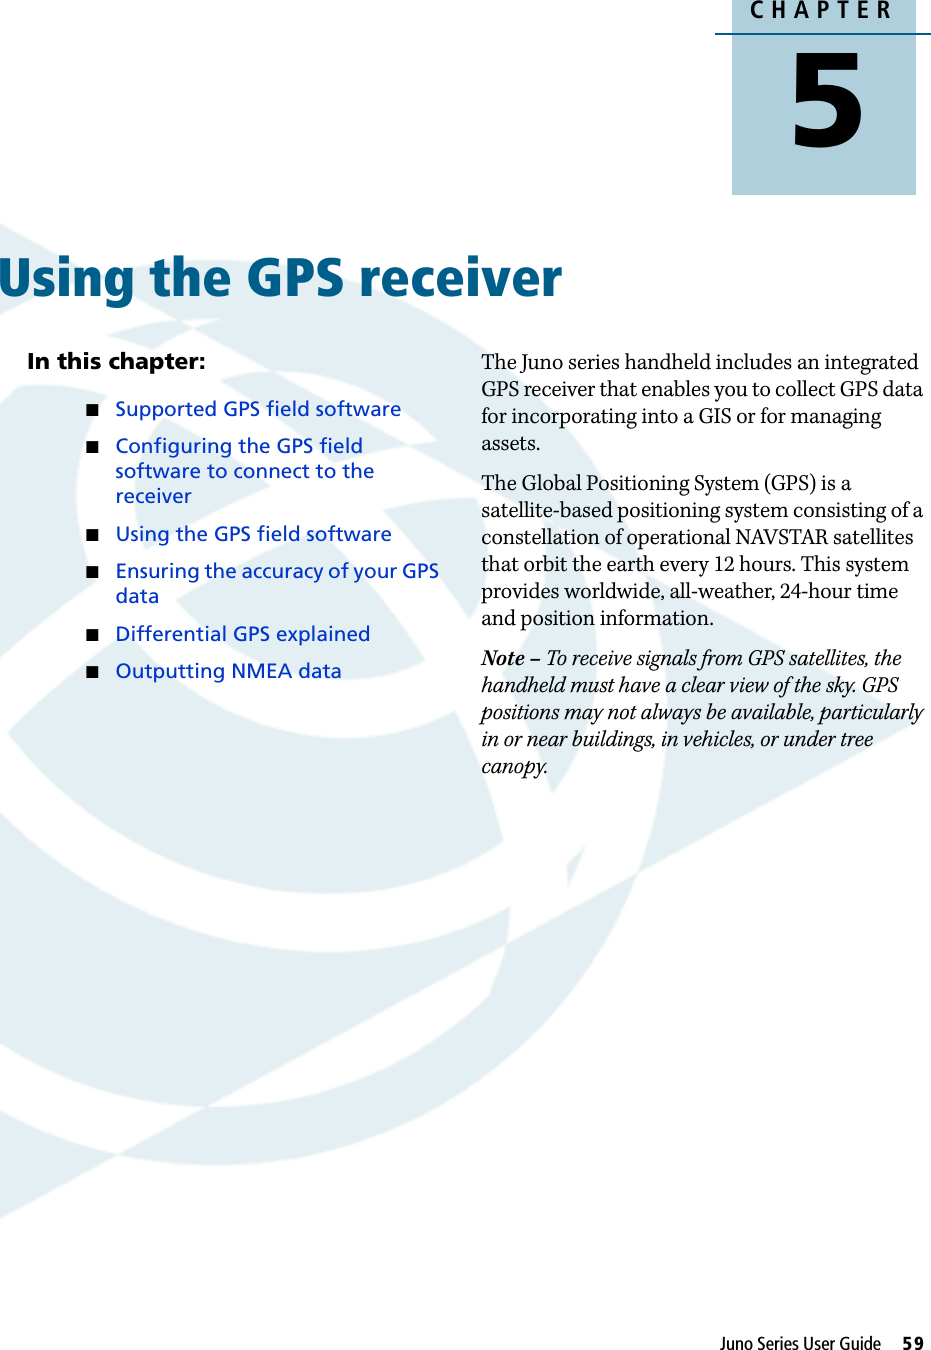 CHAPTER5Juno Series User Guide     59Using the GPS receiver 5In this chapter:Supported GPS field softwareConfiguring the GPS field software to connect to the receiverUsing the GPS field softwareEnsuring the accuracy of your GPS dataDifferential GPS explainedOutputting NMEA dataThe Juno series handheld includes an integrated GPS receiver that enables you to collect GPS data for incorporating into a GIS or for managing assets.The Global Positioning System (GPS) is a satellite-based positioning system consisting of a constellation of operational NAVSTAR satellites that orbit the earth every 12 hours. This system provides worldwide, all-weather, 24-hour time and position information. Note – To receive signals from GPS satellites, the handheld must have a clear view of the sky. GPS positions may not always be available, particularly in or near buildings, in vehicles, or under tree canopy.